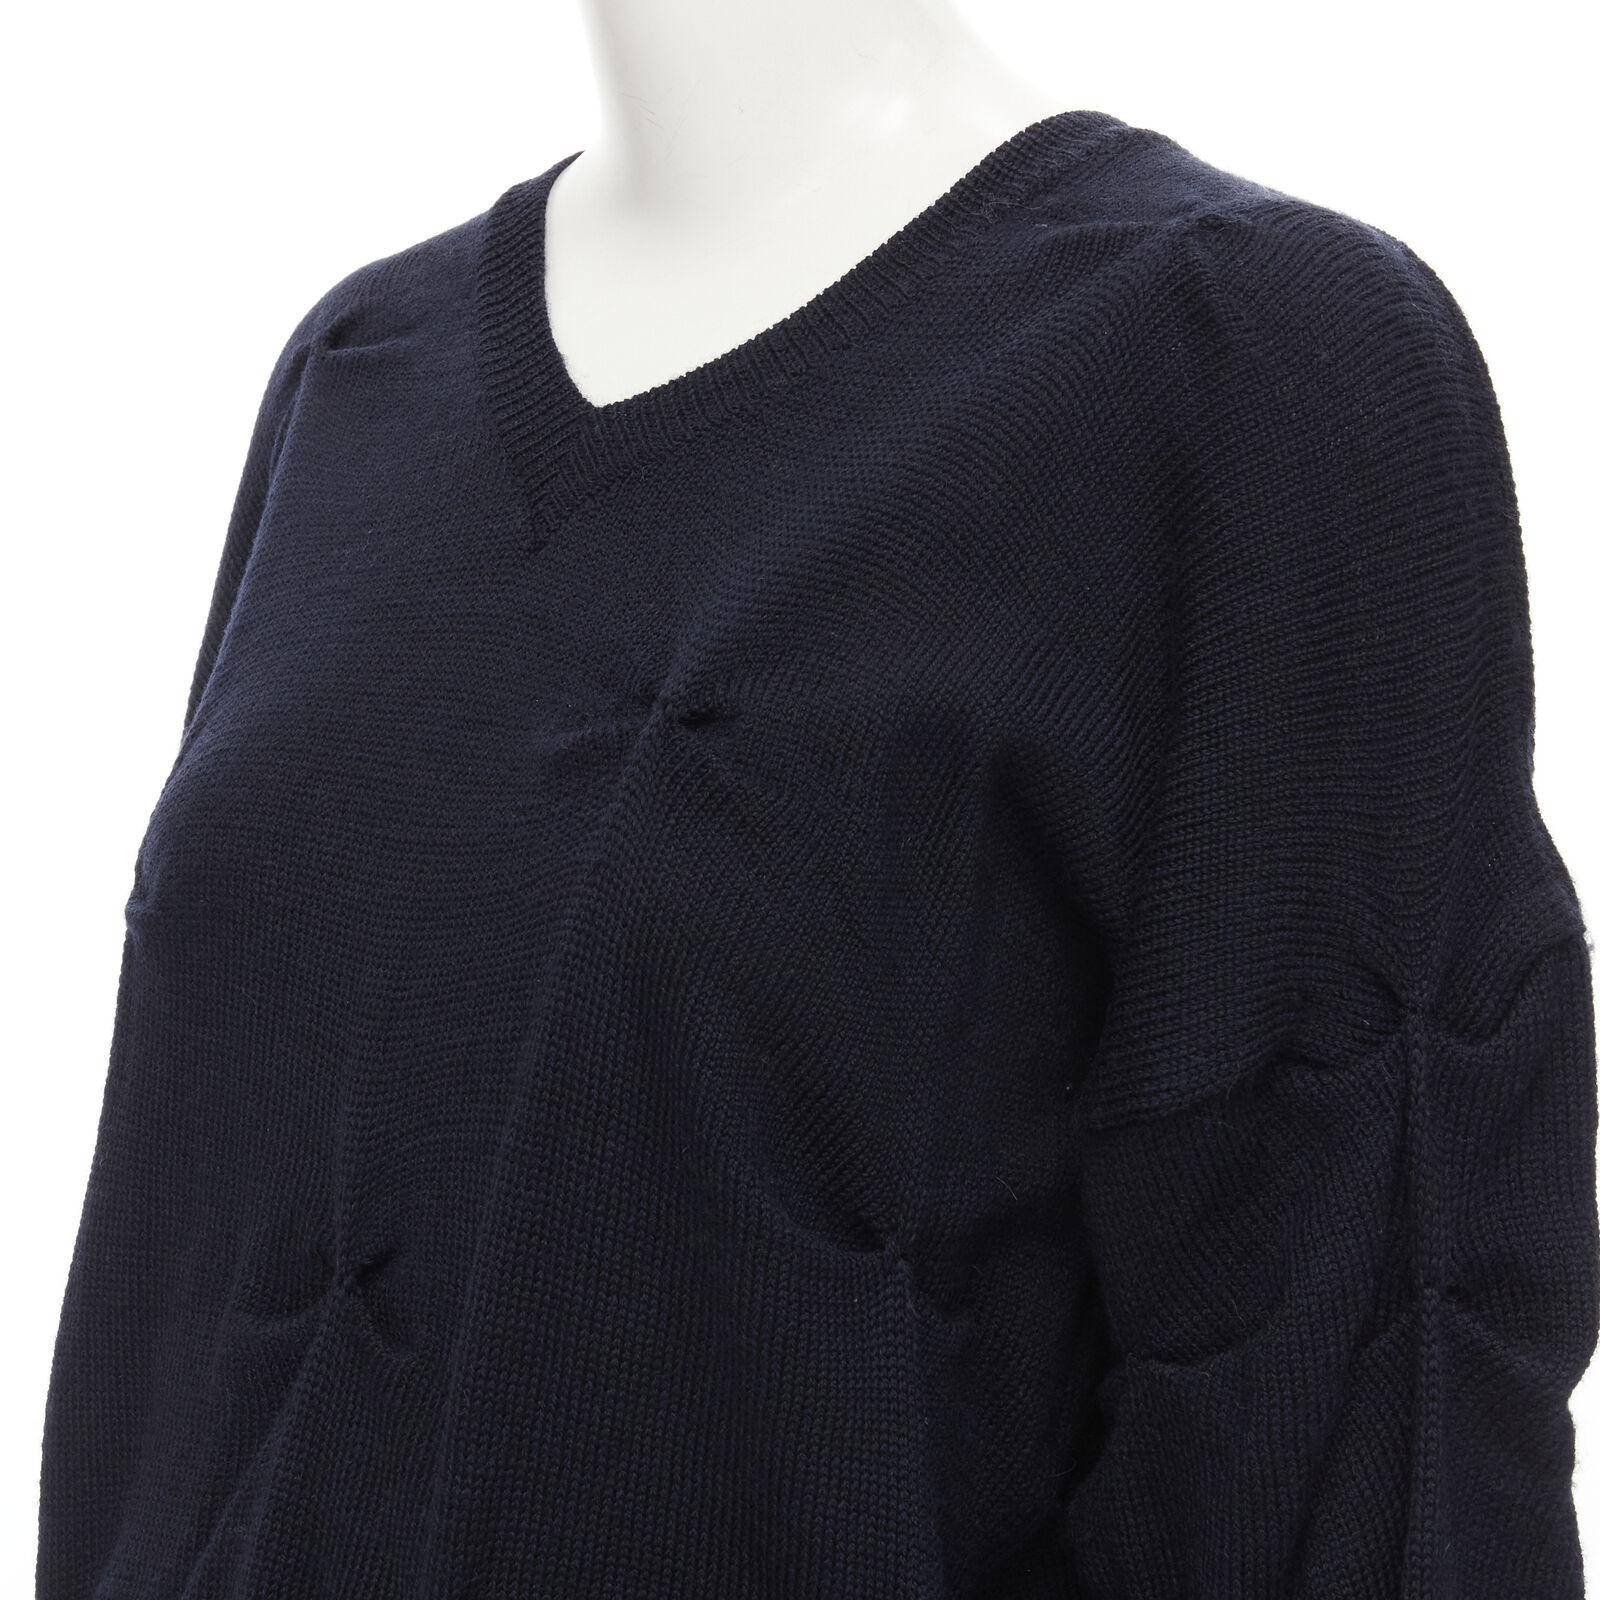 rare TRICOT COMME DES GARCONS Vintage 1980's black wool pinched bow sweater
Reference: CRTI/A00739
Brand: Comme Des Garcons
Designer: Rei Kawakubo
Collection: 1980s
Material: 100% Wool
Color: Black
Pattern: Solid
Closure: Pullover
Extra Details: